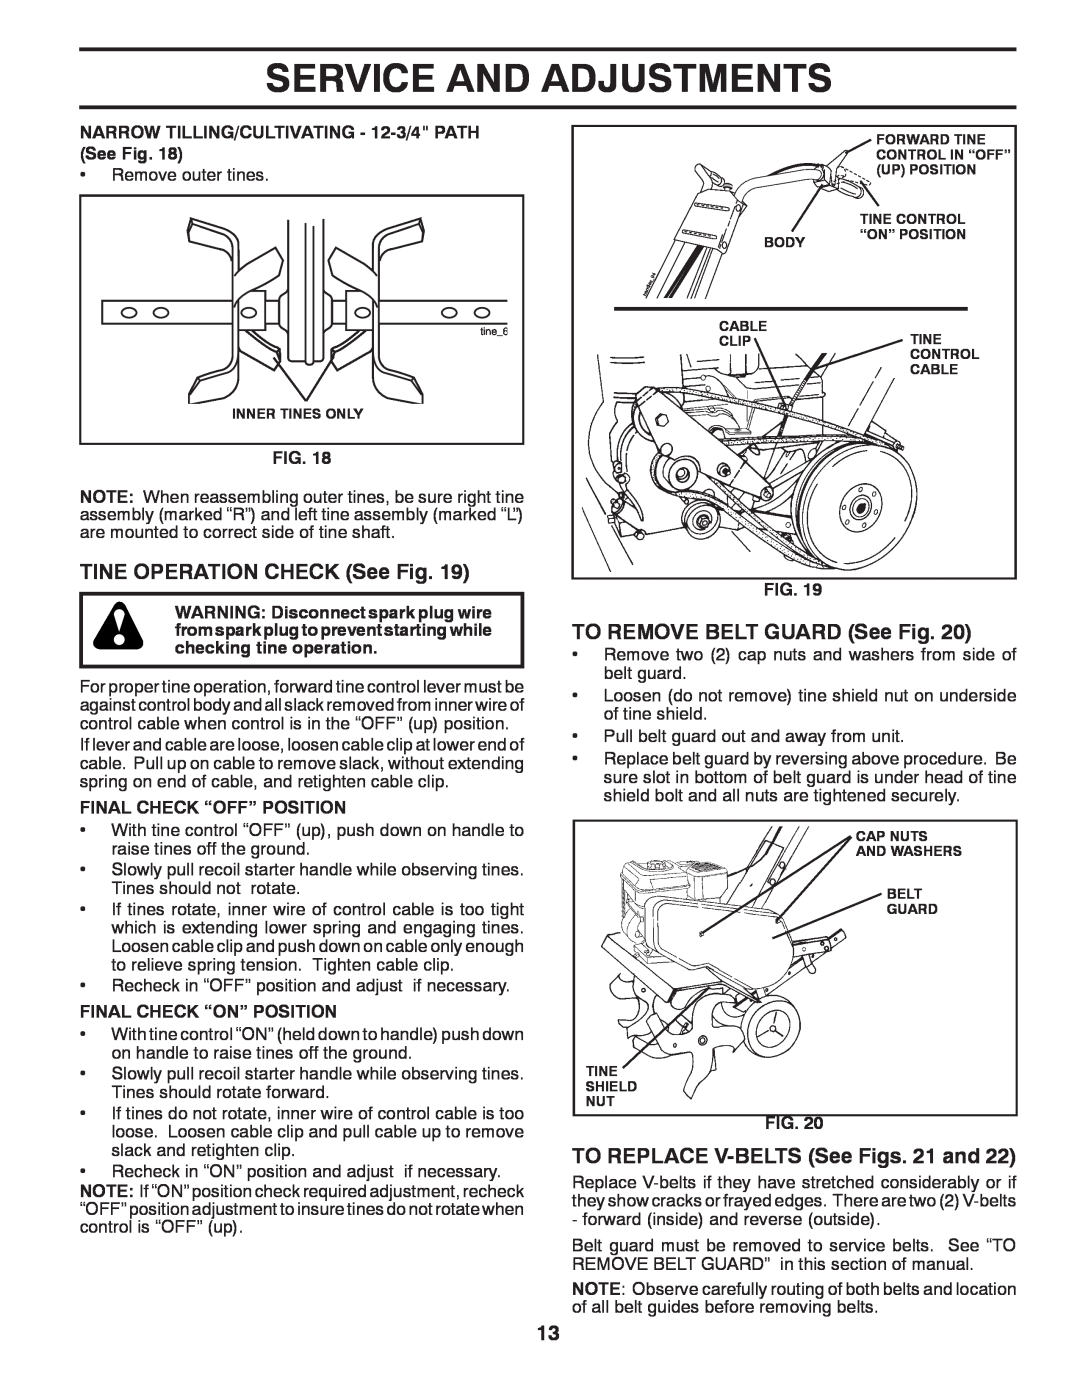 Poulan HDF800X manual TINE OPERATION CHECK See Fig, TO REMOVE BELT GUARD See Fig, TO REPLACE V-BELTS See Figs. 21 and 